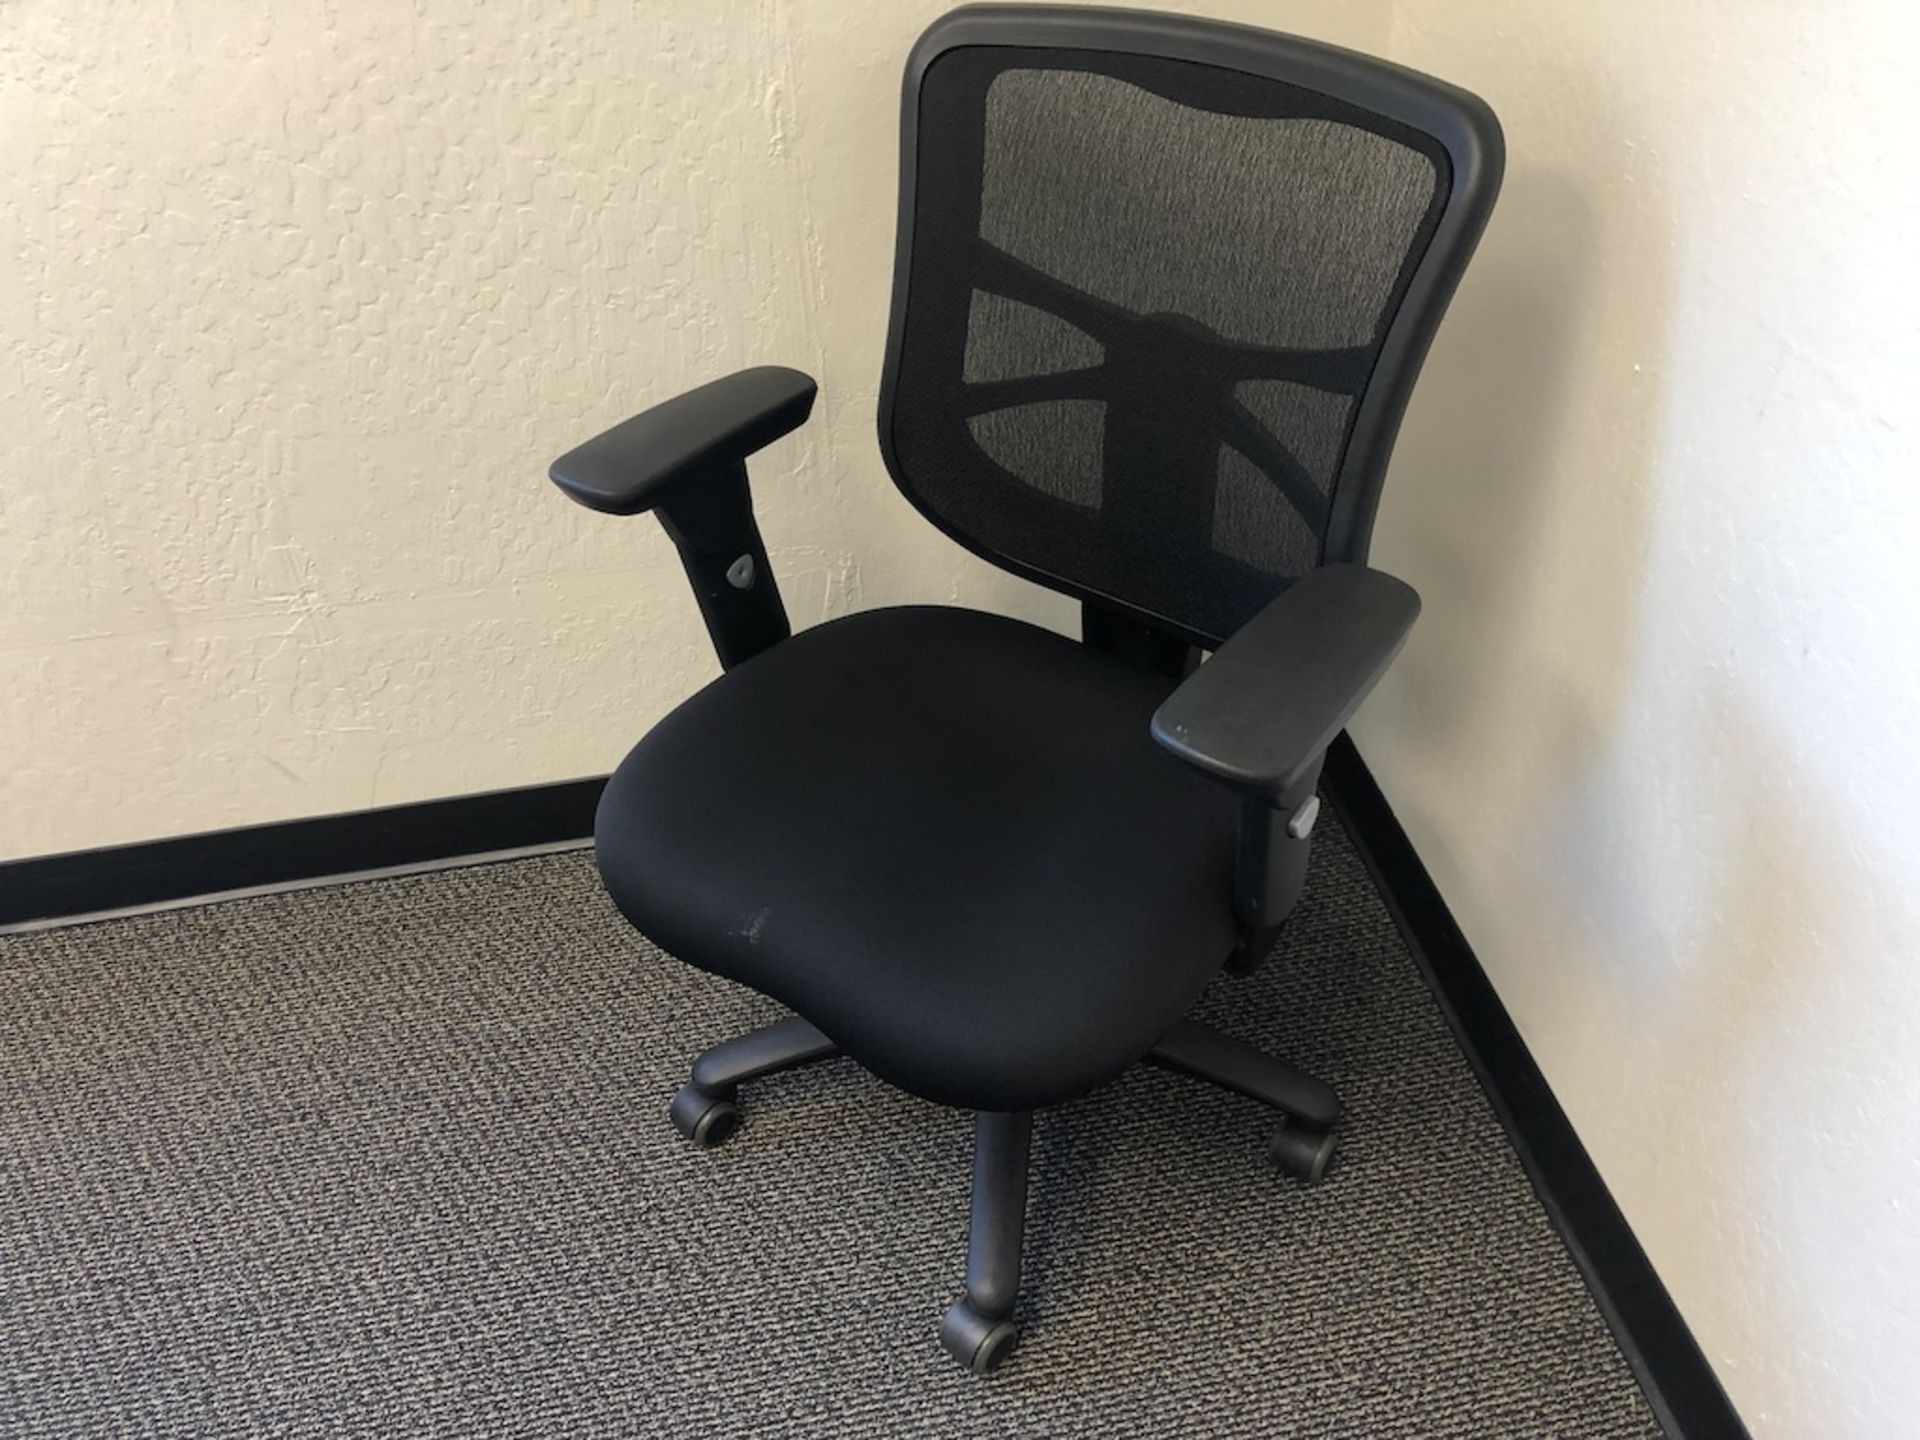 5 CASTER OFFICE CHAIR PADDED ARM REST, BLACK SEAT CUSHION, MESH BACK SUPPORT   SCHNEIDER ELECTRIC- - Image 3 of 3